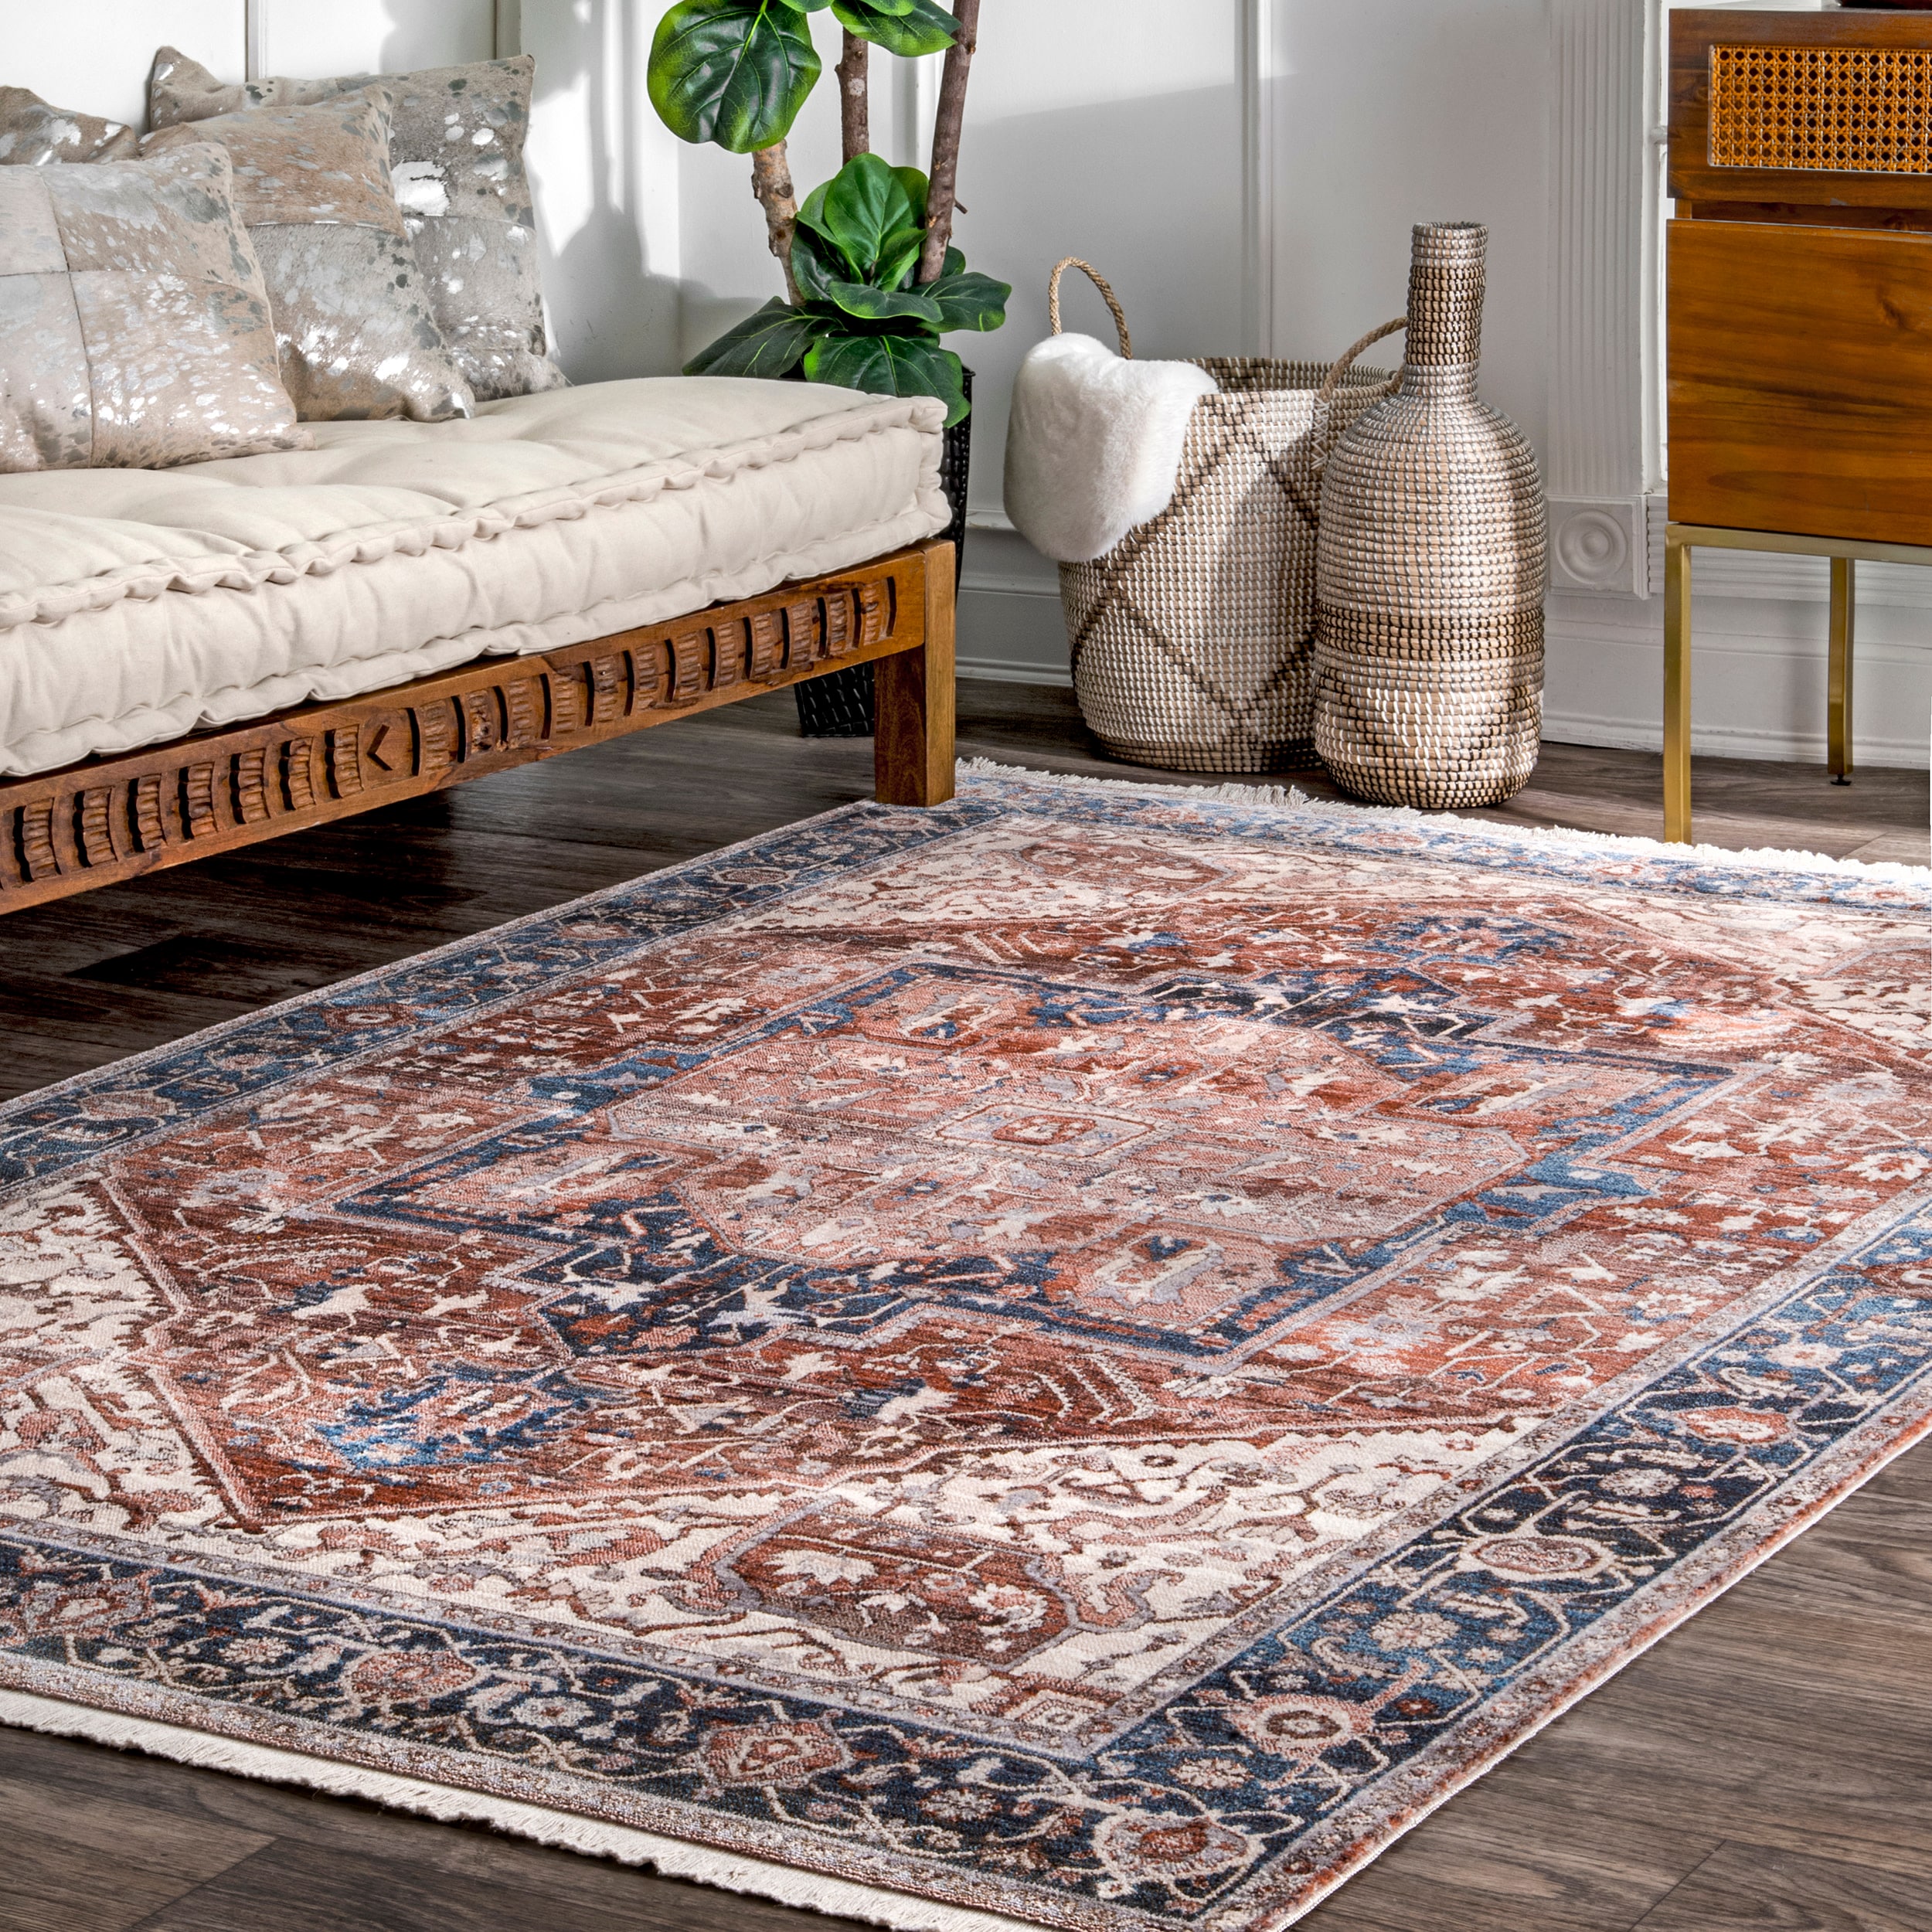 nuLOOM Oliveira 6 X 9 (ft) Red Indoor Medallion Area Rug in the